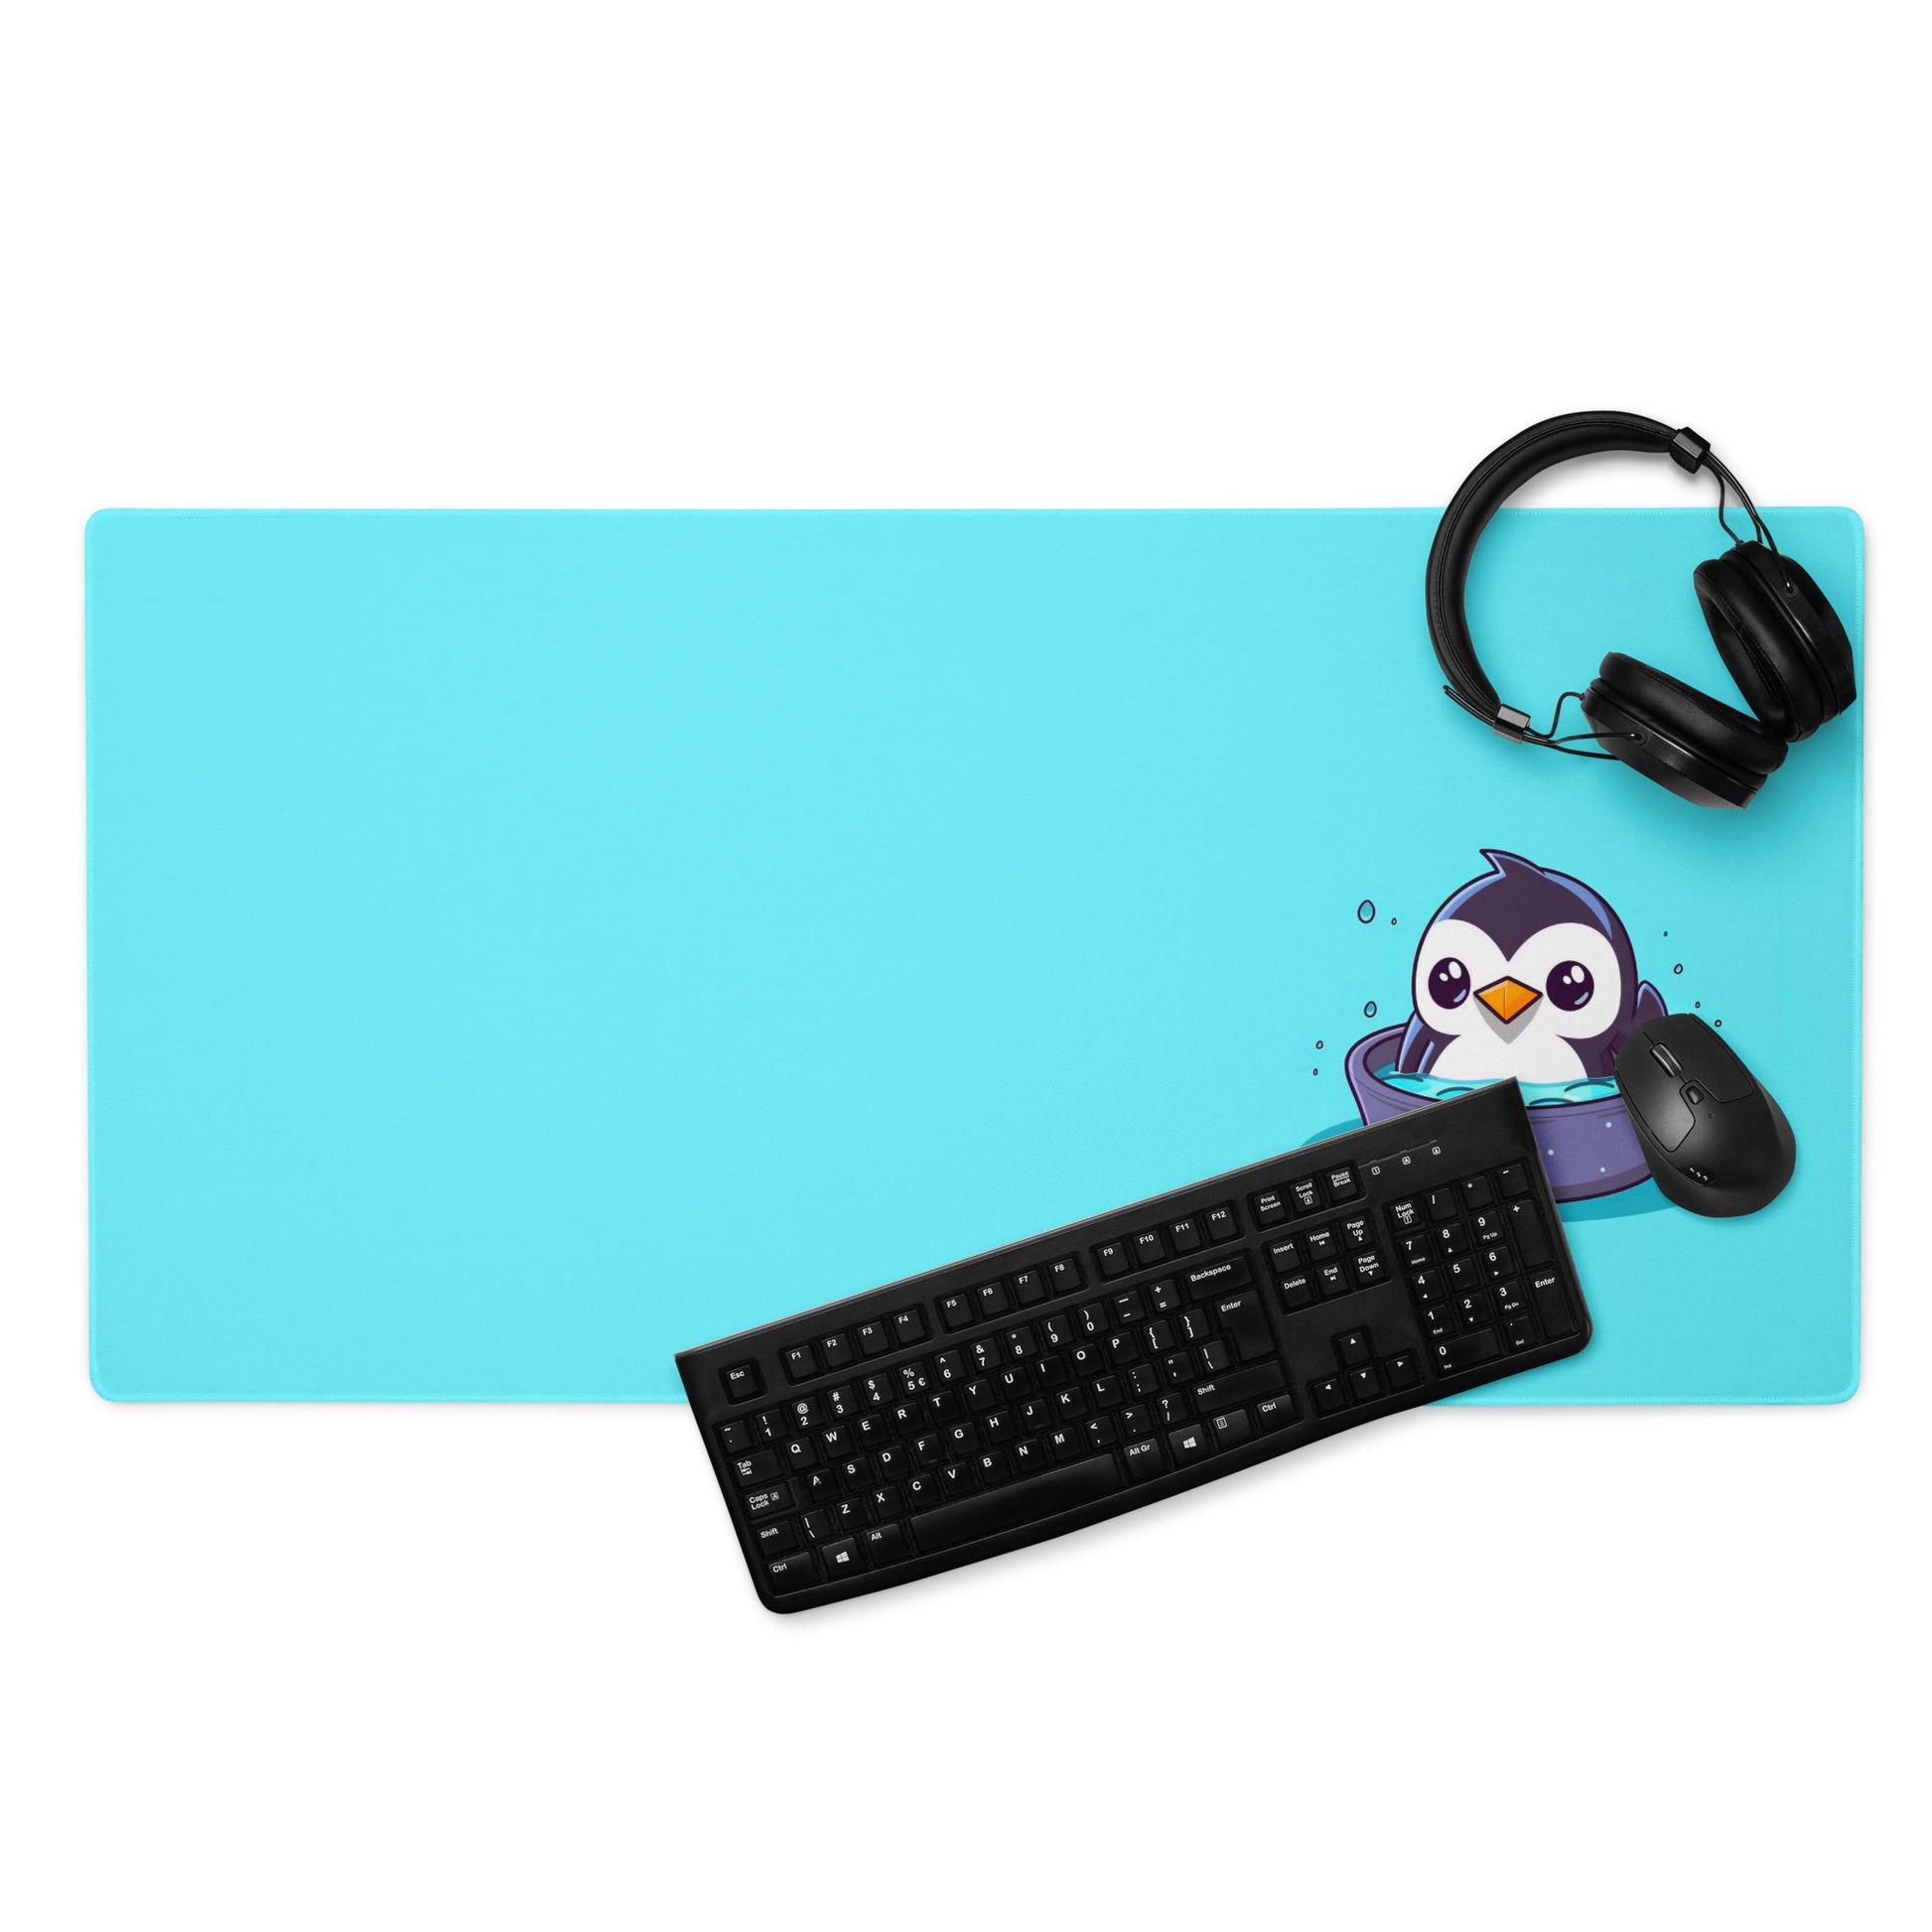 36" x 18" desk pad with a cute penguin sitting in an ice bath on it displayed with a keyboard, headphones and a mouse. Blue in color.